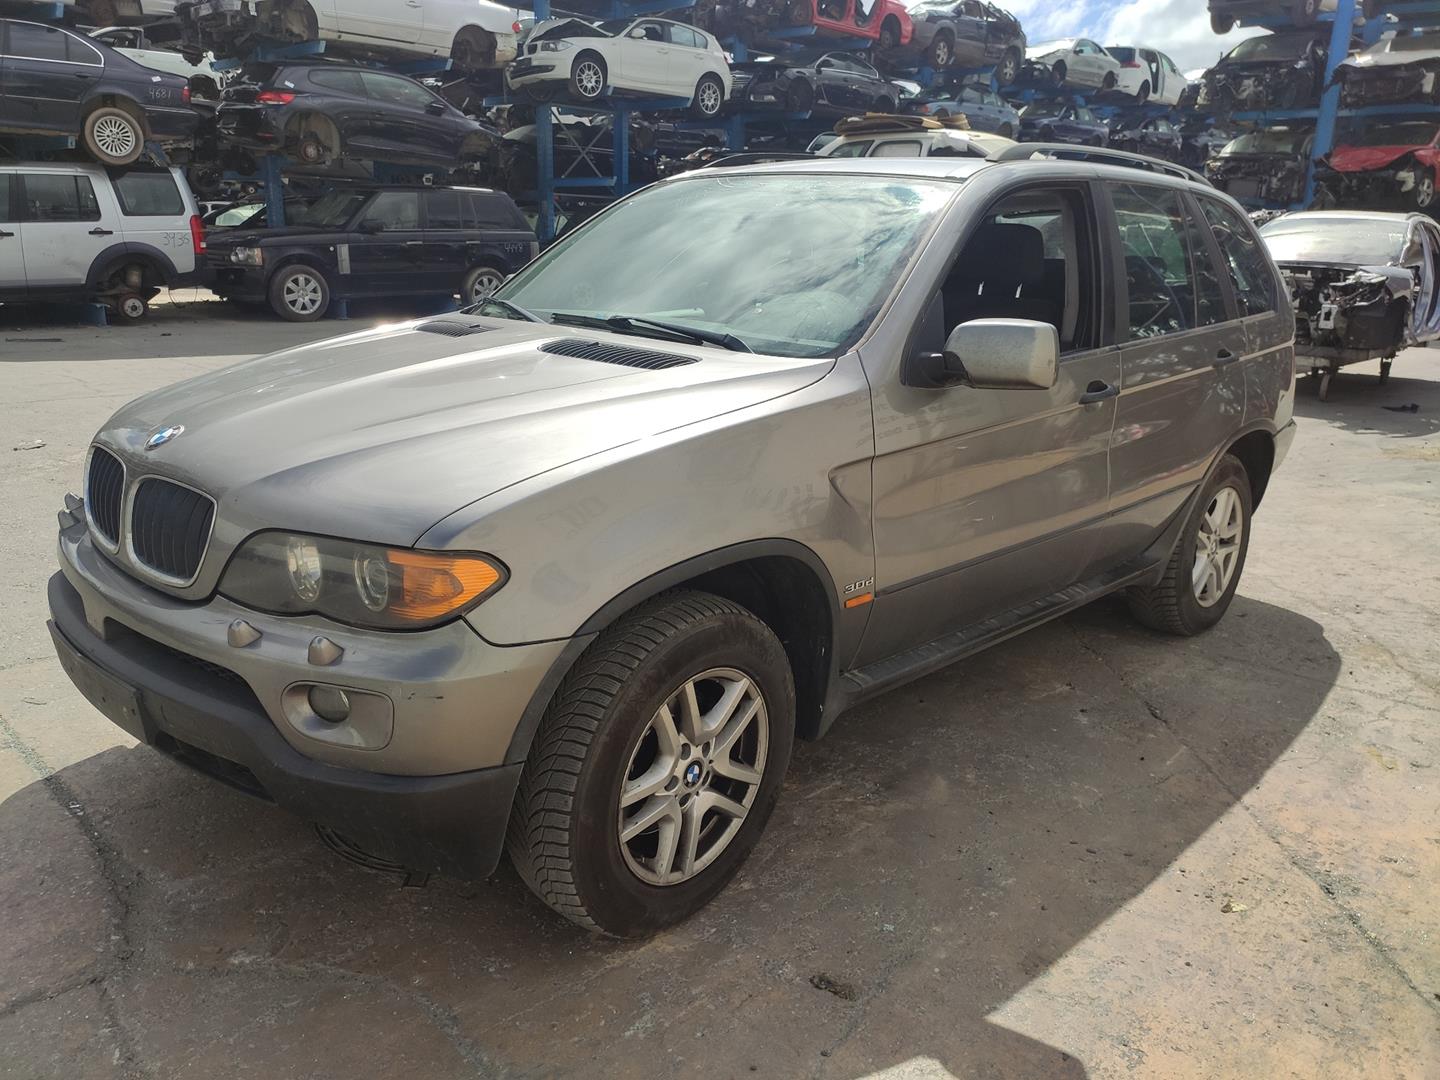 BMW X5 E53 (1999-2006) Other Body Parts 8408706, 51718408706 19898407